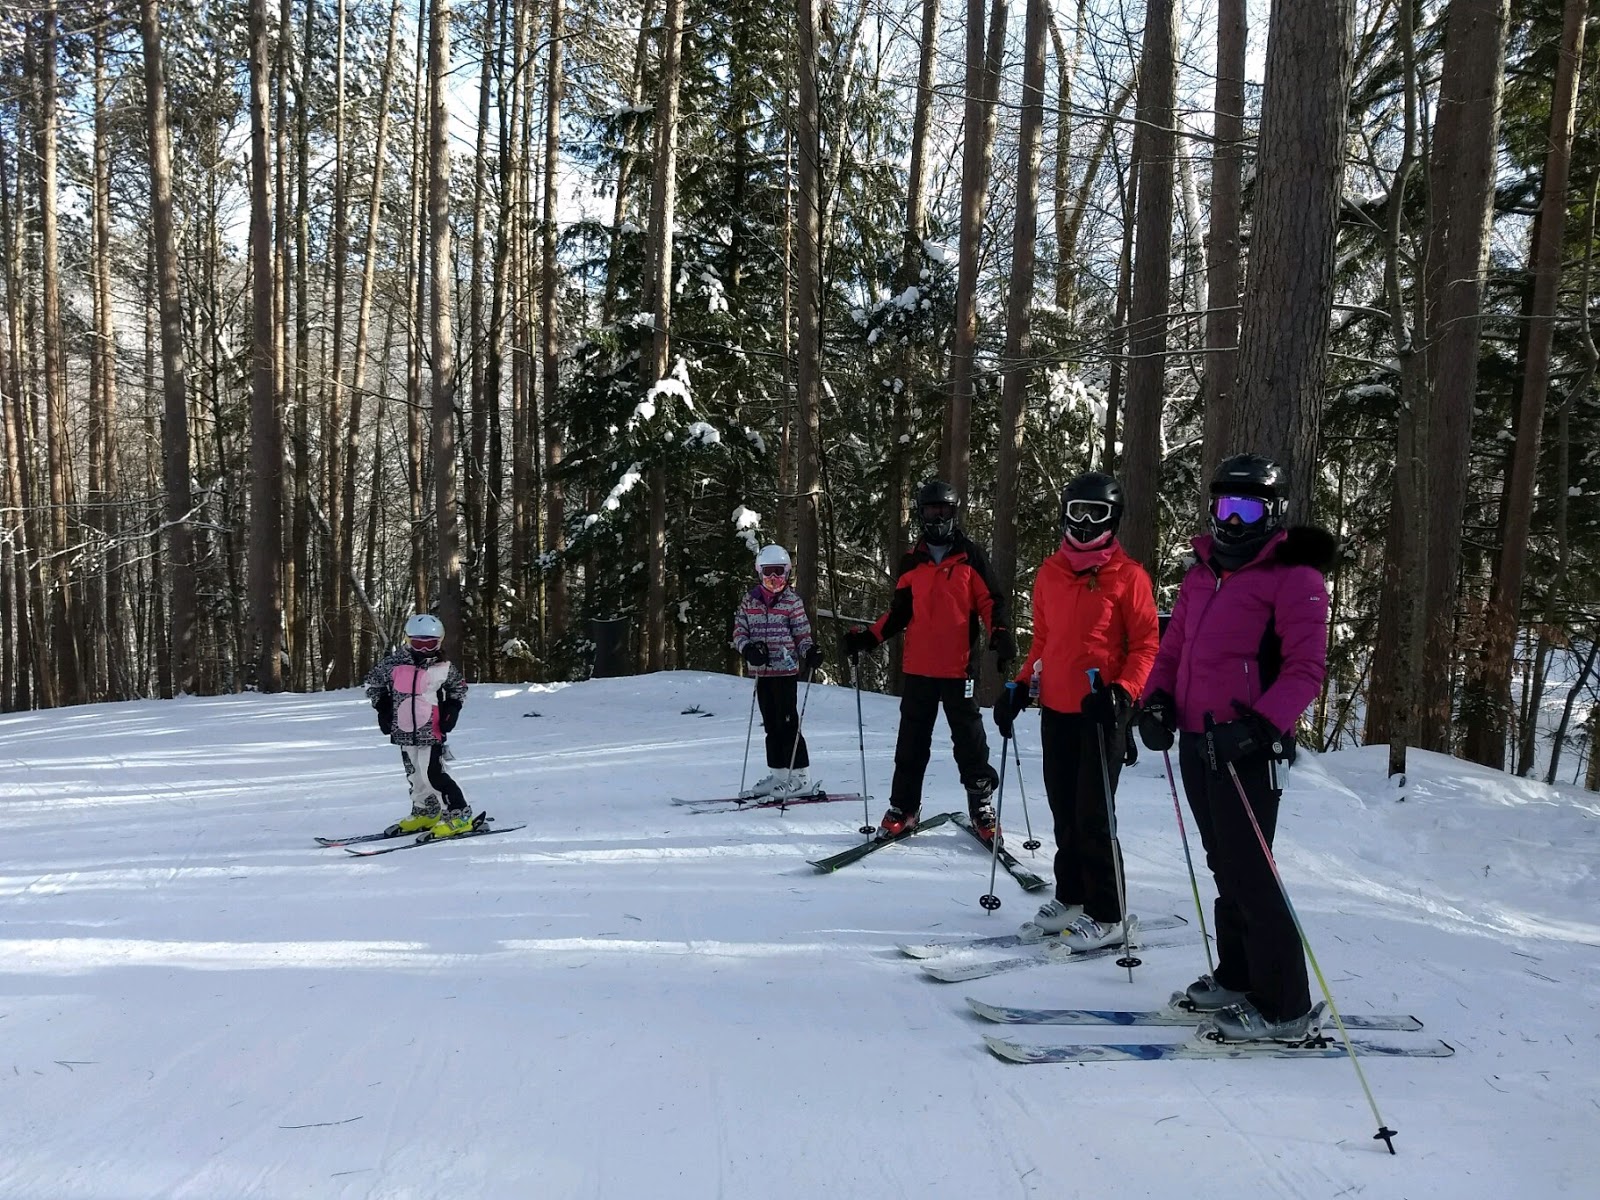 Group of skiers near trees